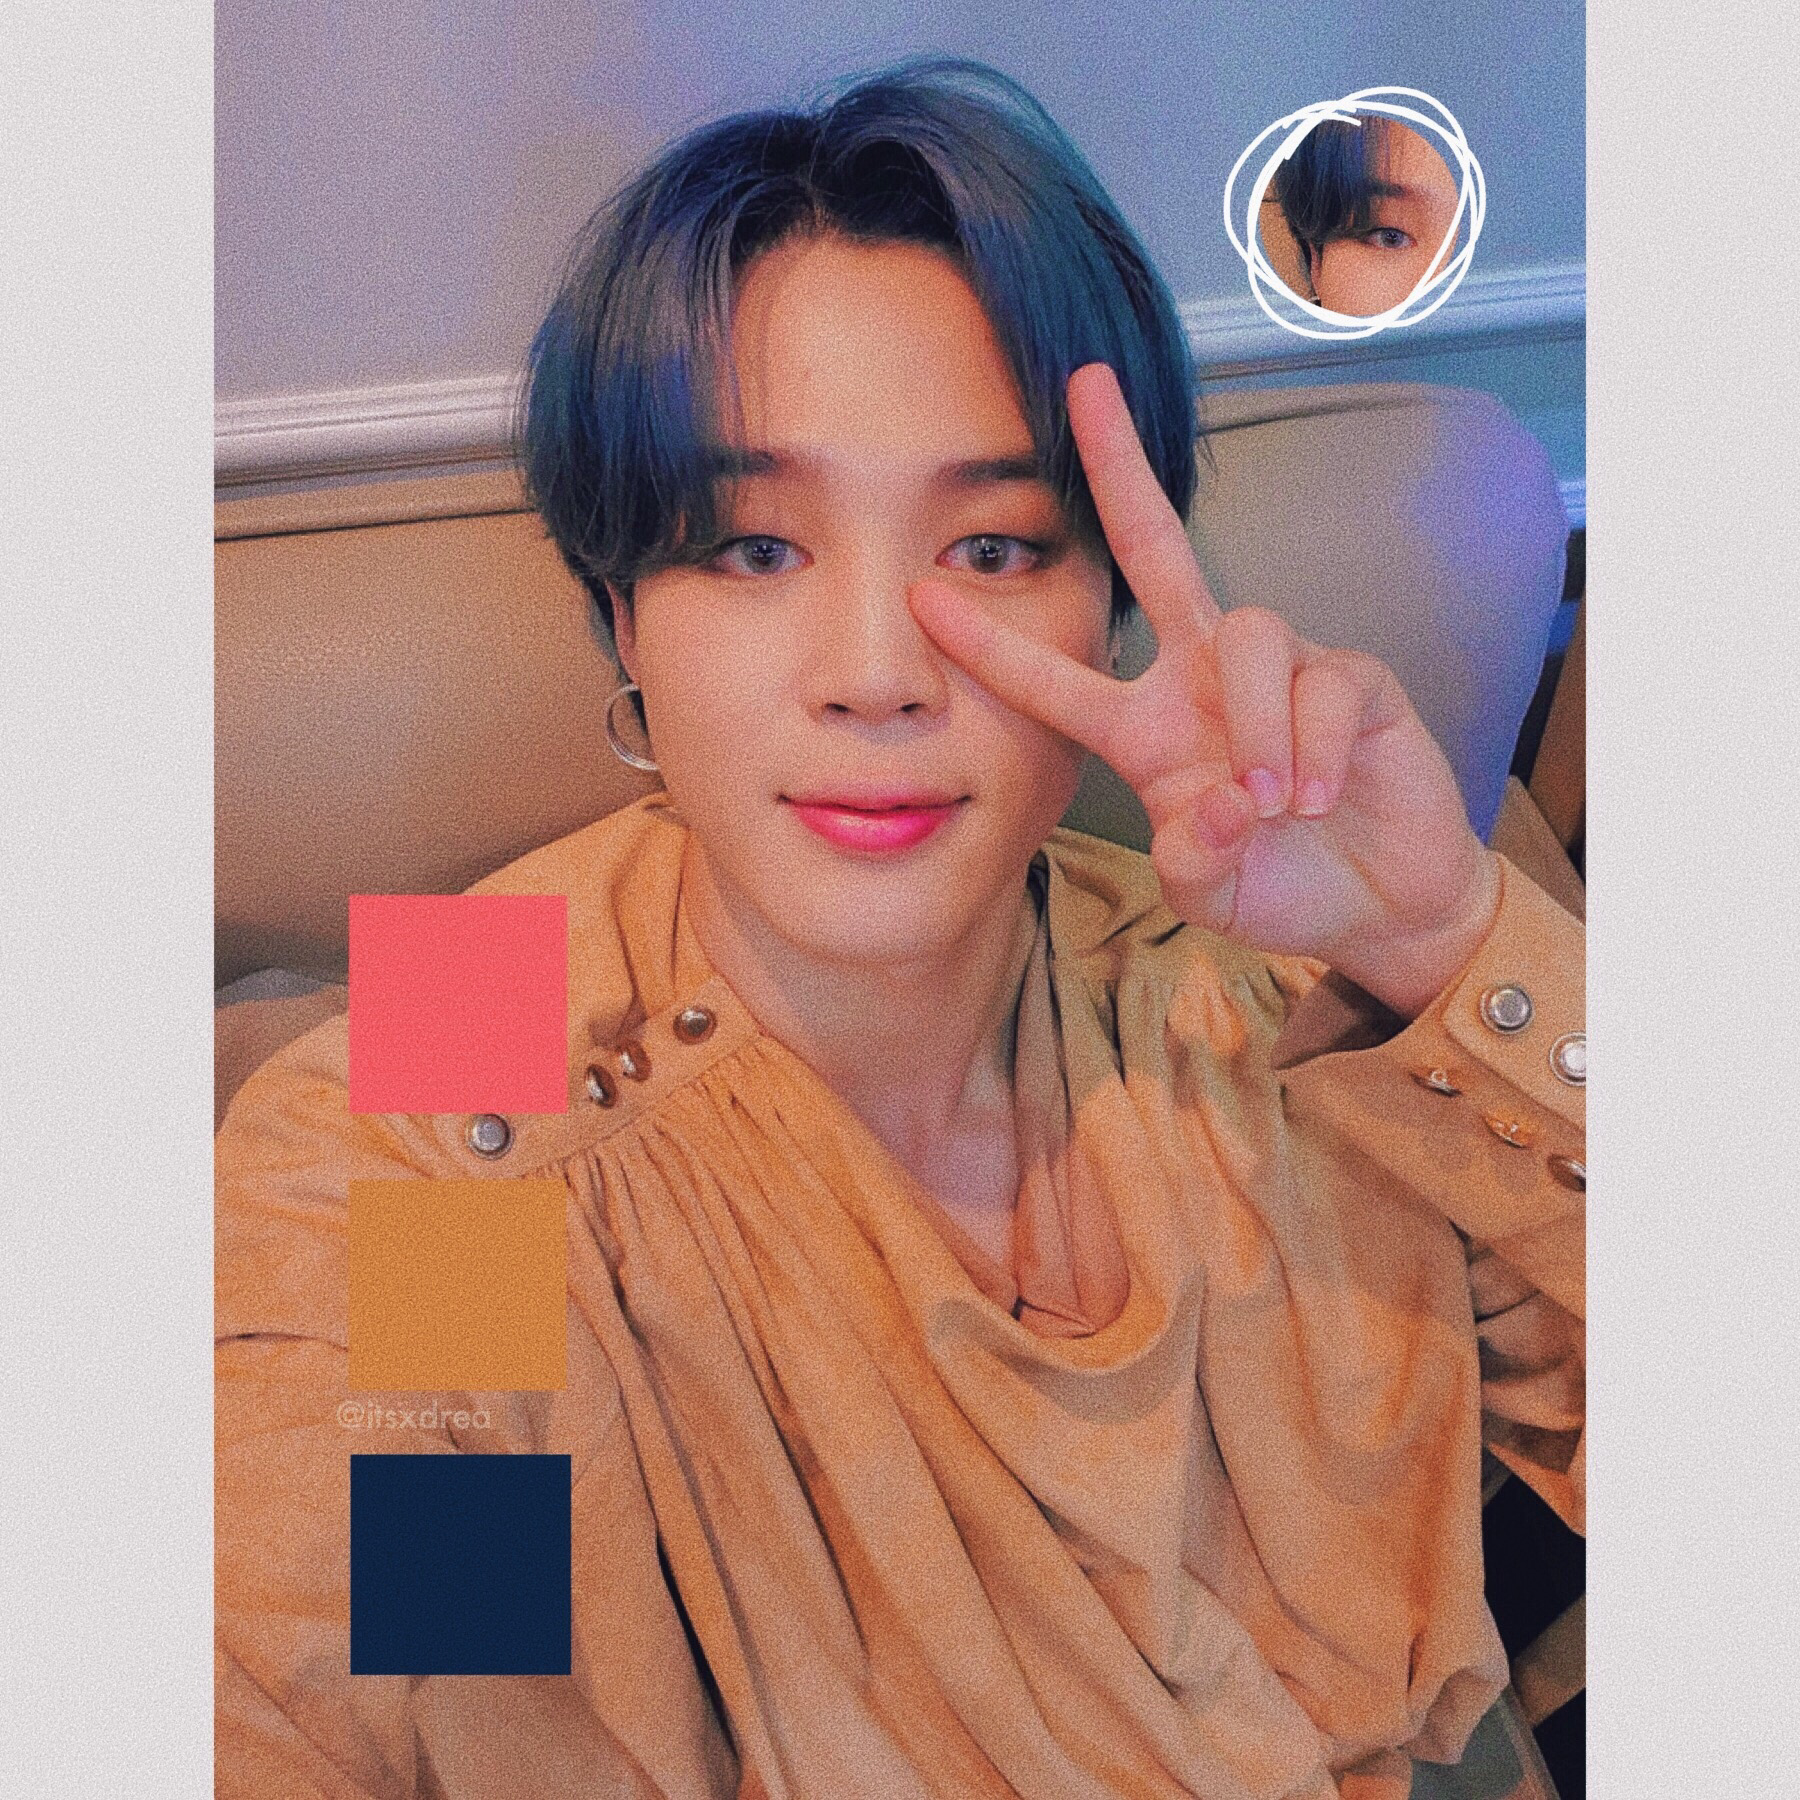 🧡
• park jimin // bts •
| inspired by an insta filter lol |
this looks worse than i thought lol.  but he’s so beautiful sigh. and i can’t believe the ap exams will be 45 mins long and oNLY frq’s :o